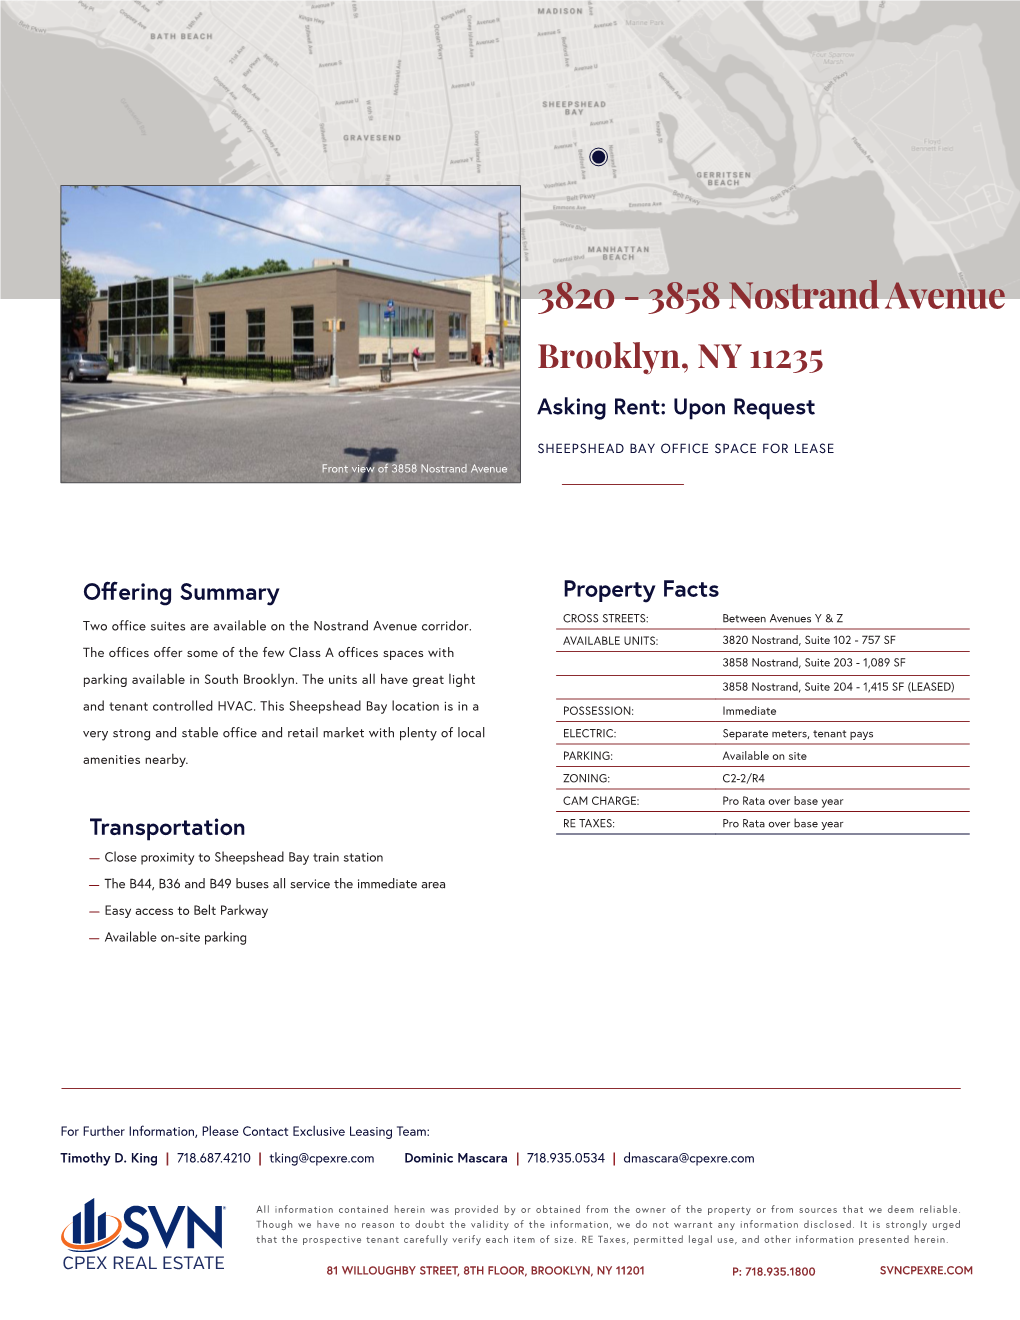 3820 - 3858 Nostrand Avenue Brooklyn, NY 11235 Asking Rent: Upon Request